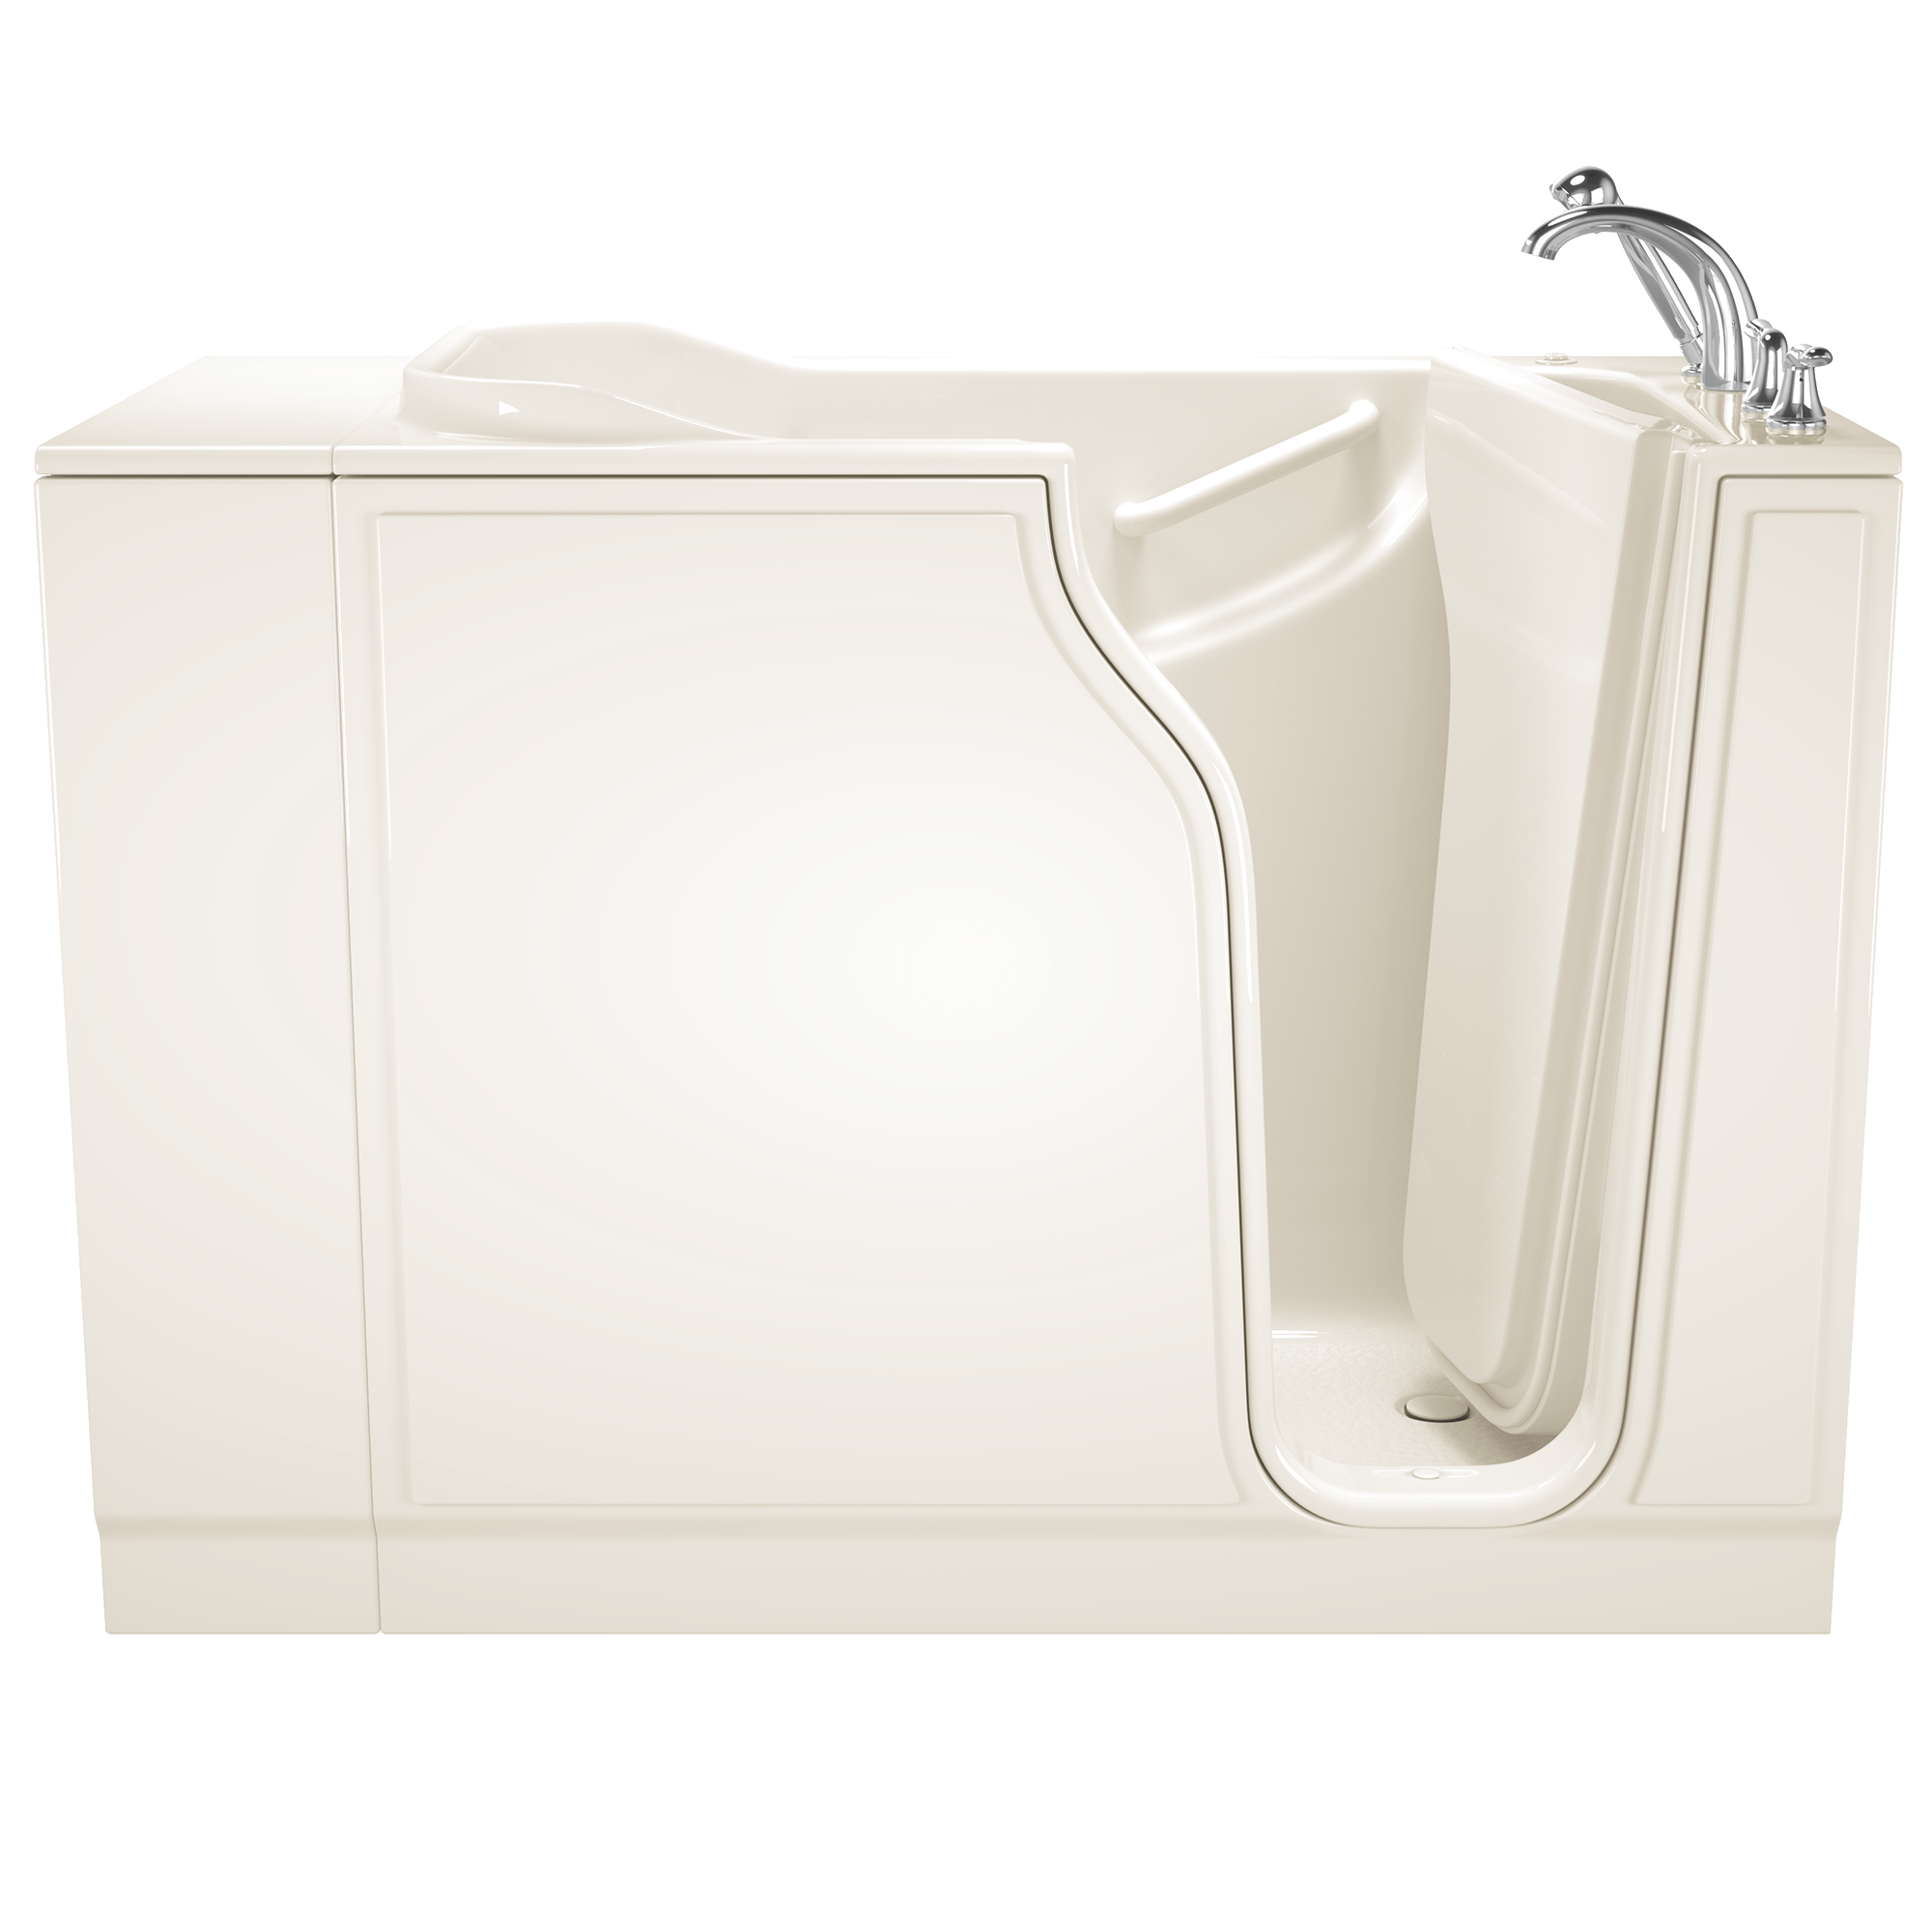 Gelcoat Entry Series 52 x 30 Inch Walk In Tub With Whirlpool System - Right Hand Drain With Faucet BISCUIT